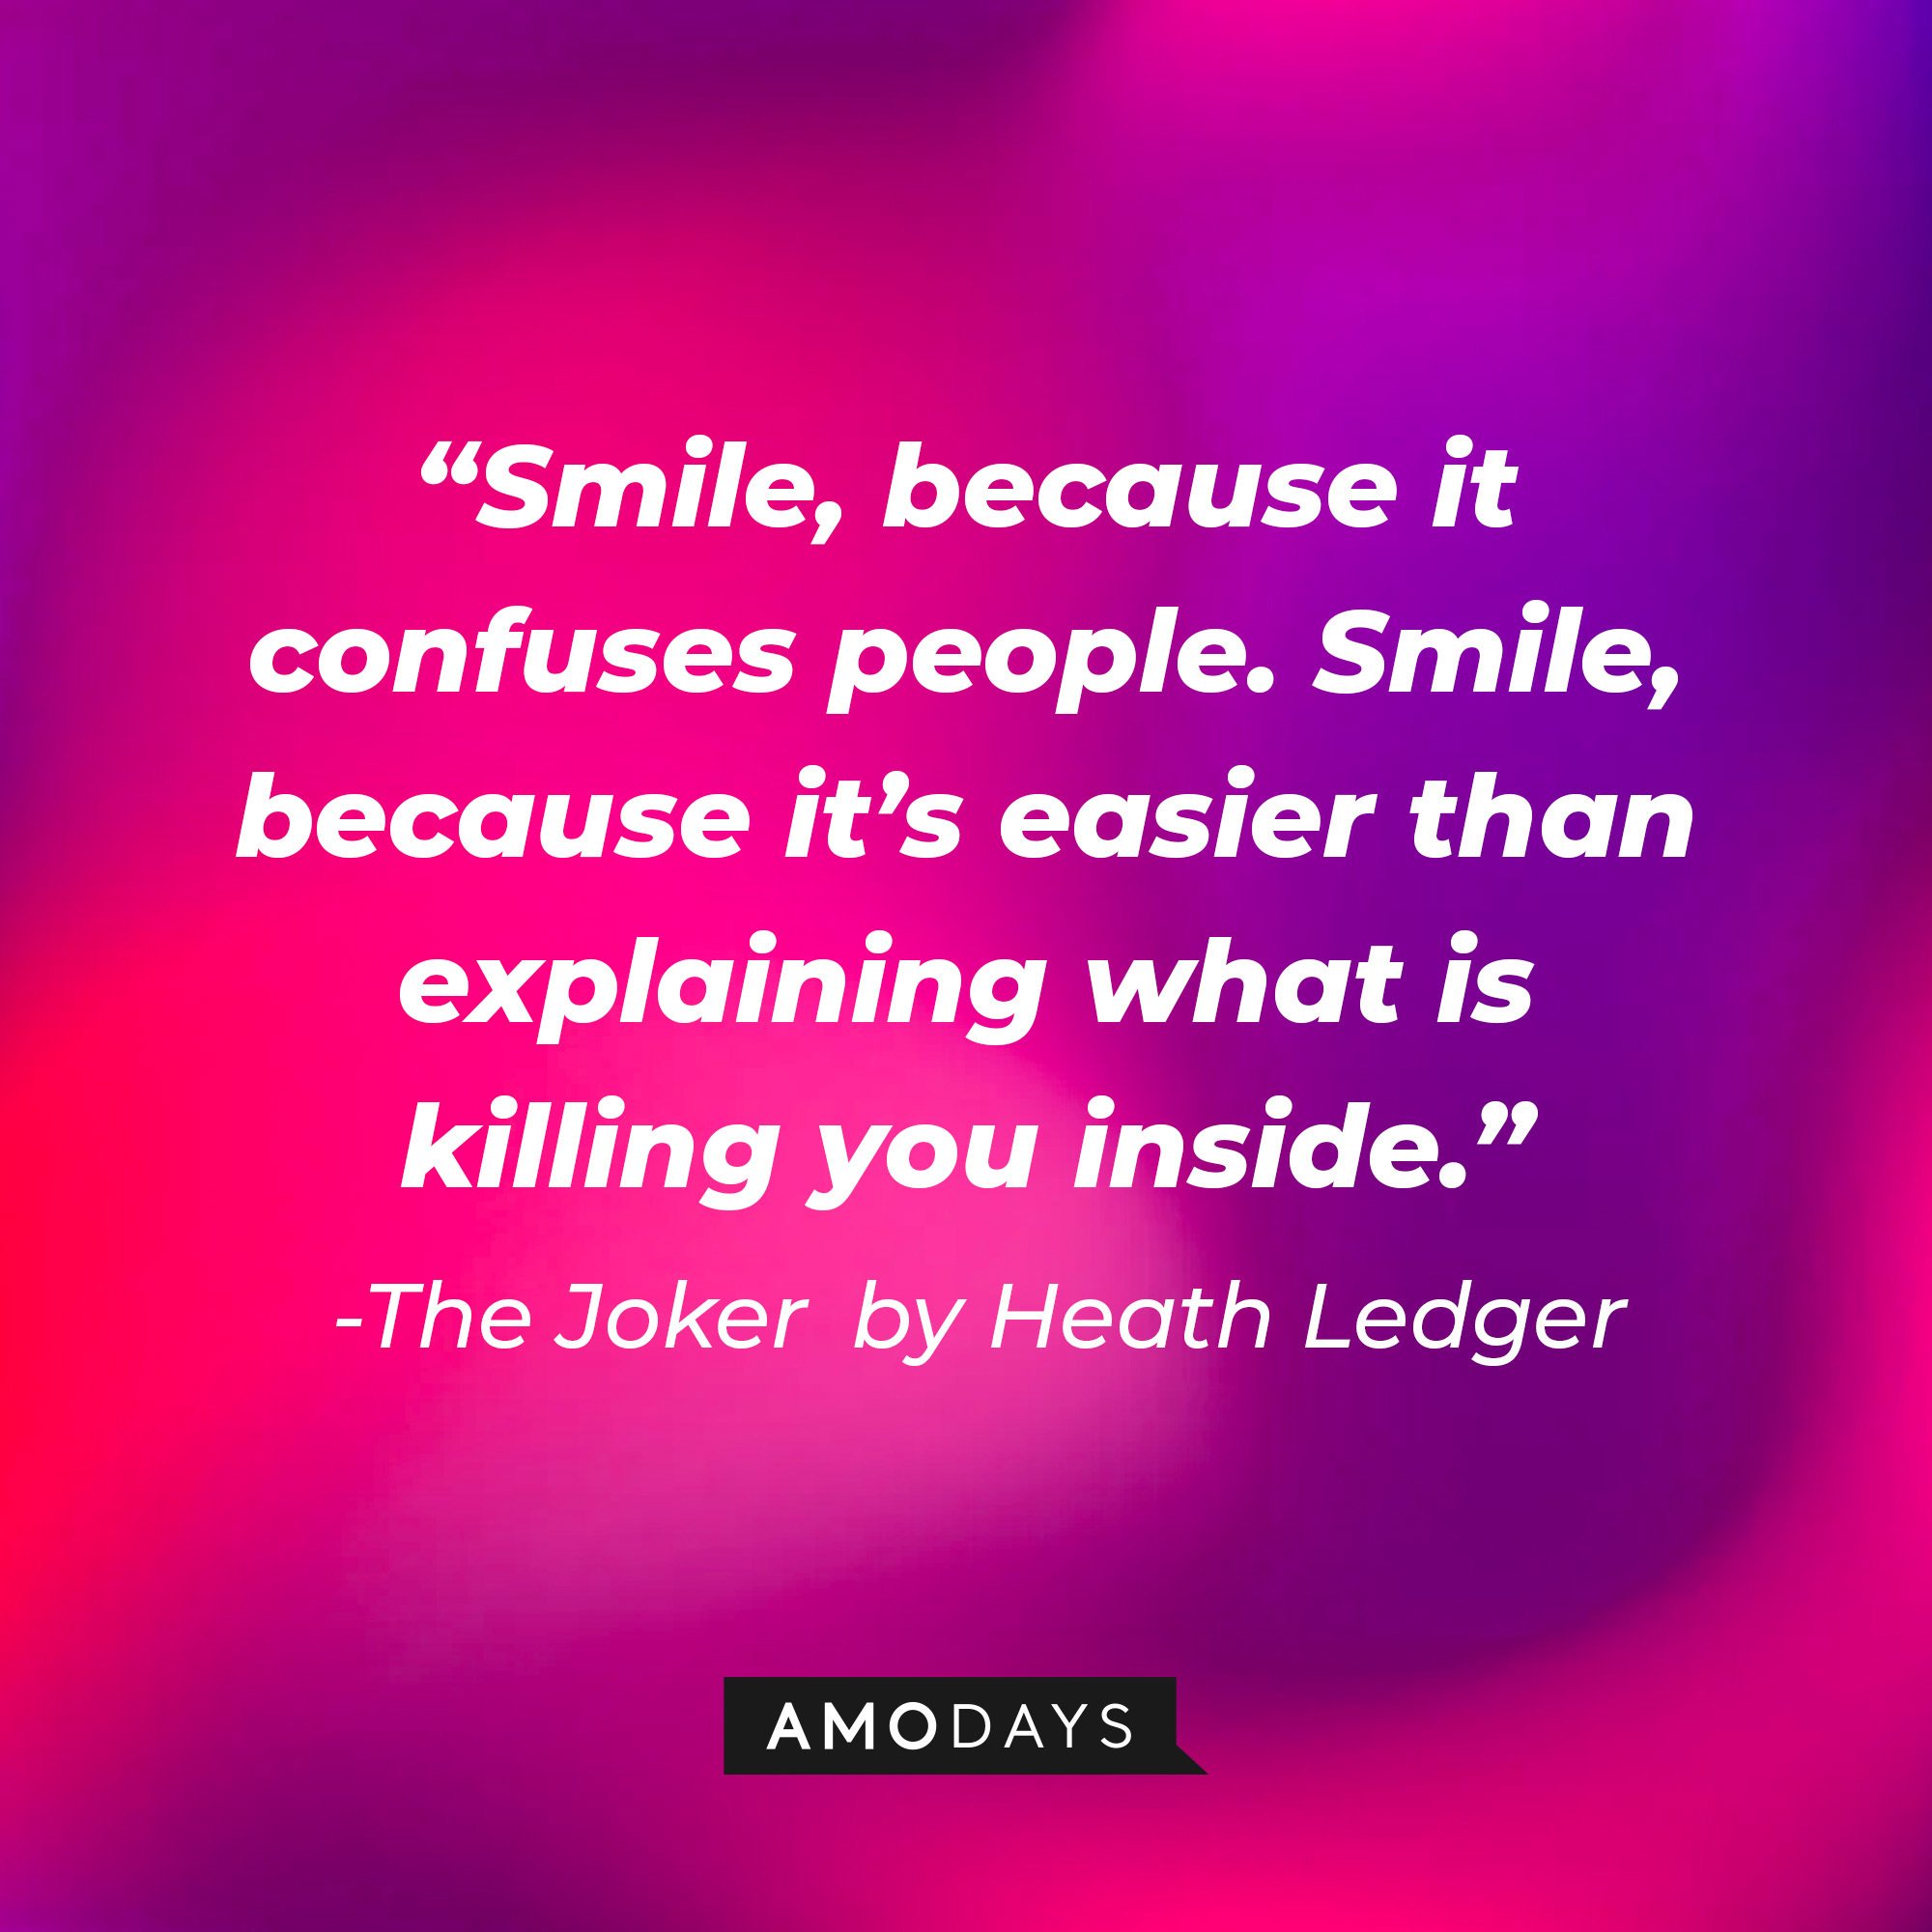 The Joker in Christopher Nolan’s “The Dark Night” quote: “Smile, because it confuses people. Smile, because it’s easier than explaining what is killing you inside.” | Image: Amodays